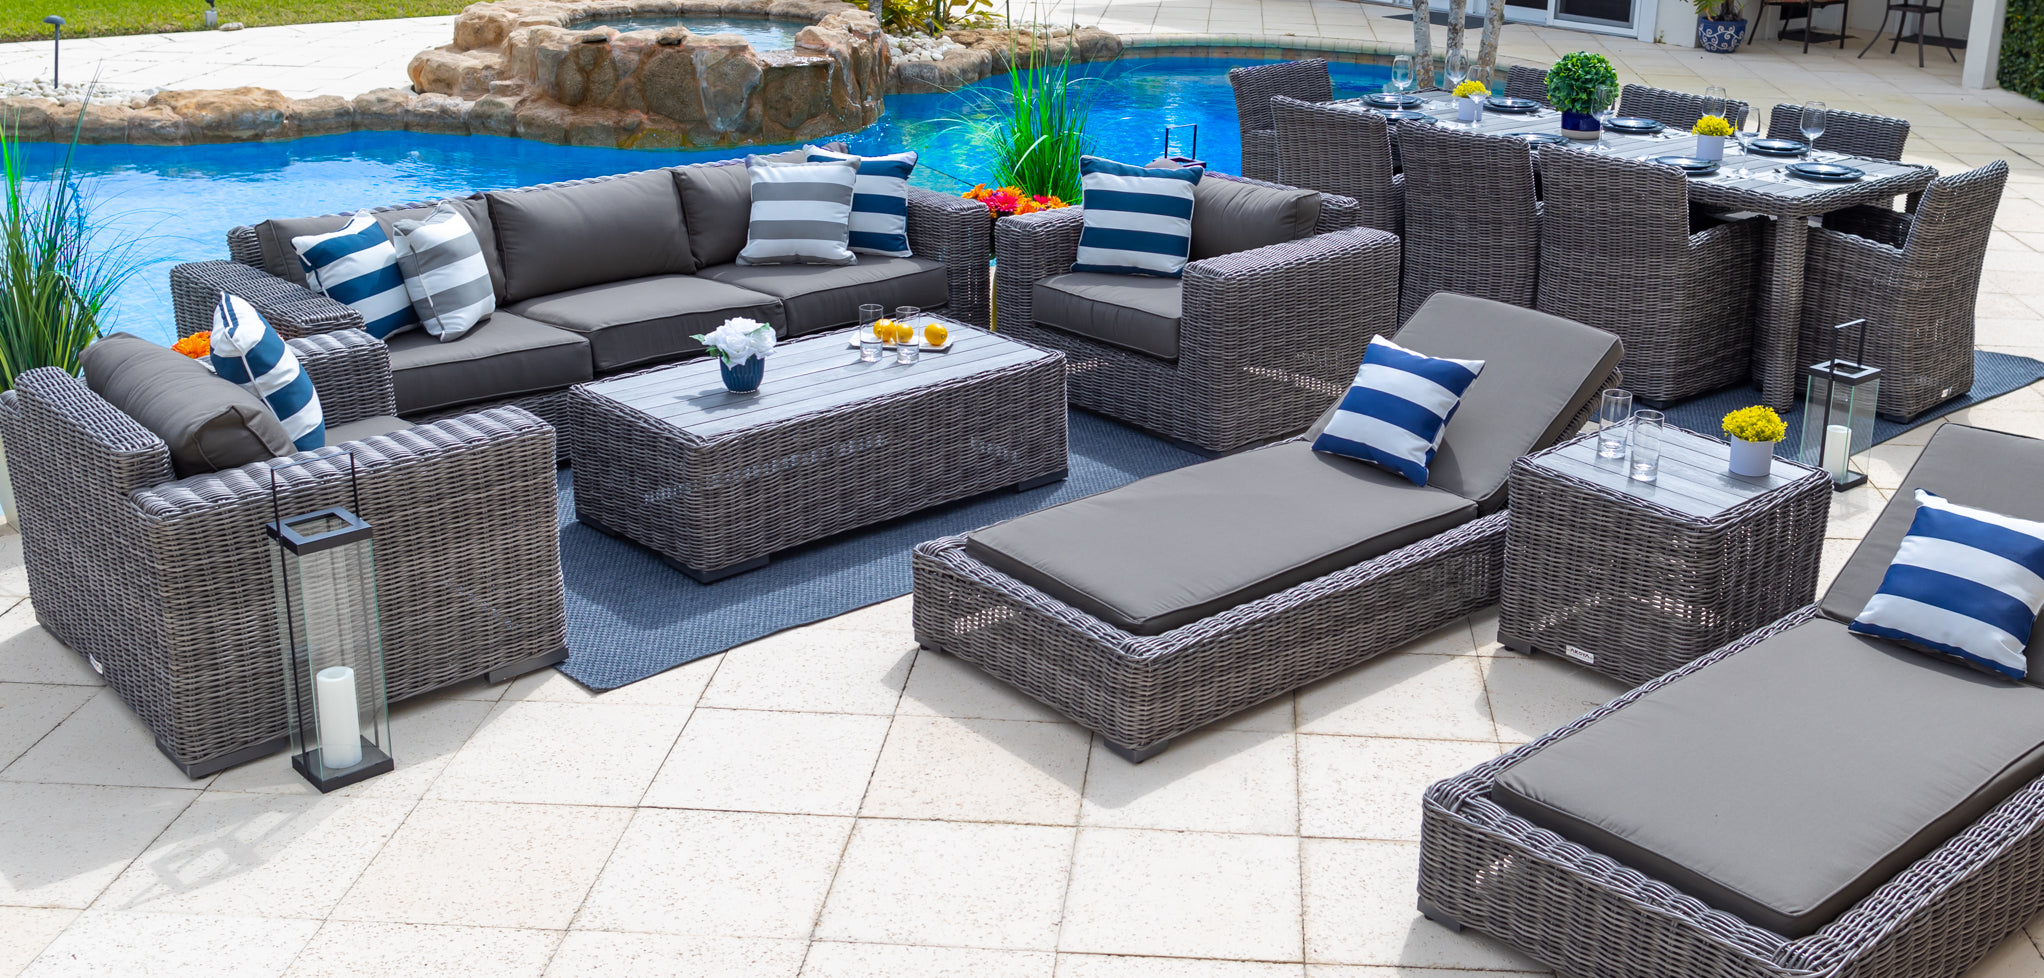 Outdoor Patio Furniture for Sale